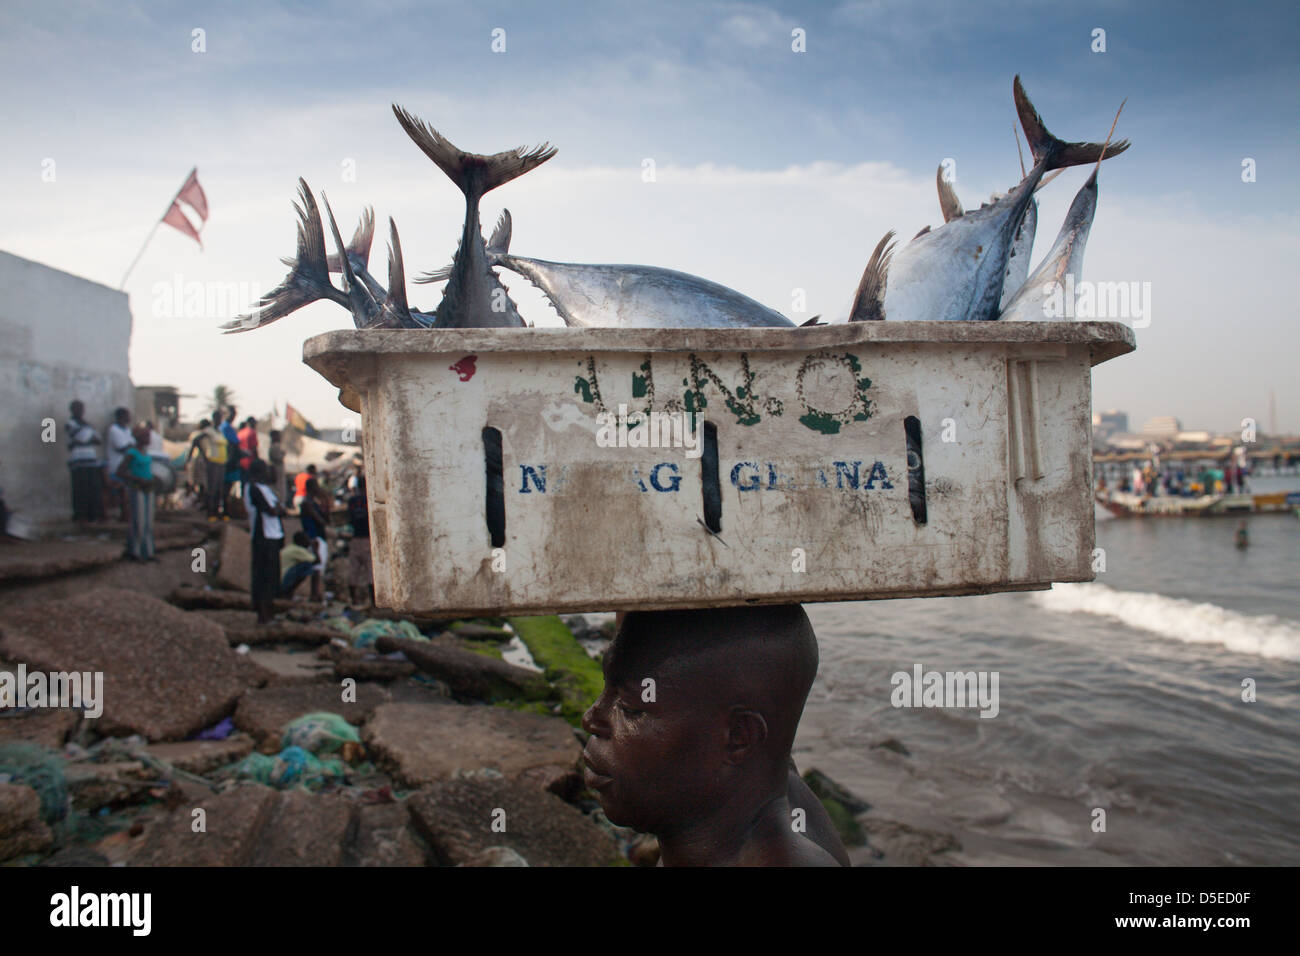 A fisherman carries in tuna to shore from a fishing boat in Accra, Ghana. Stock Photo